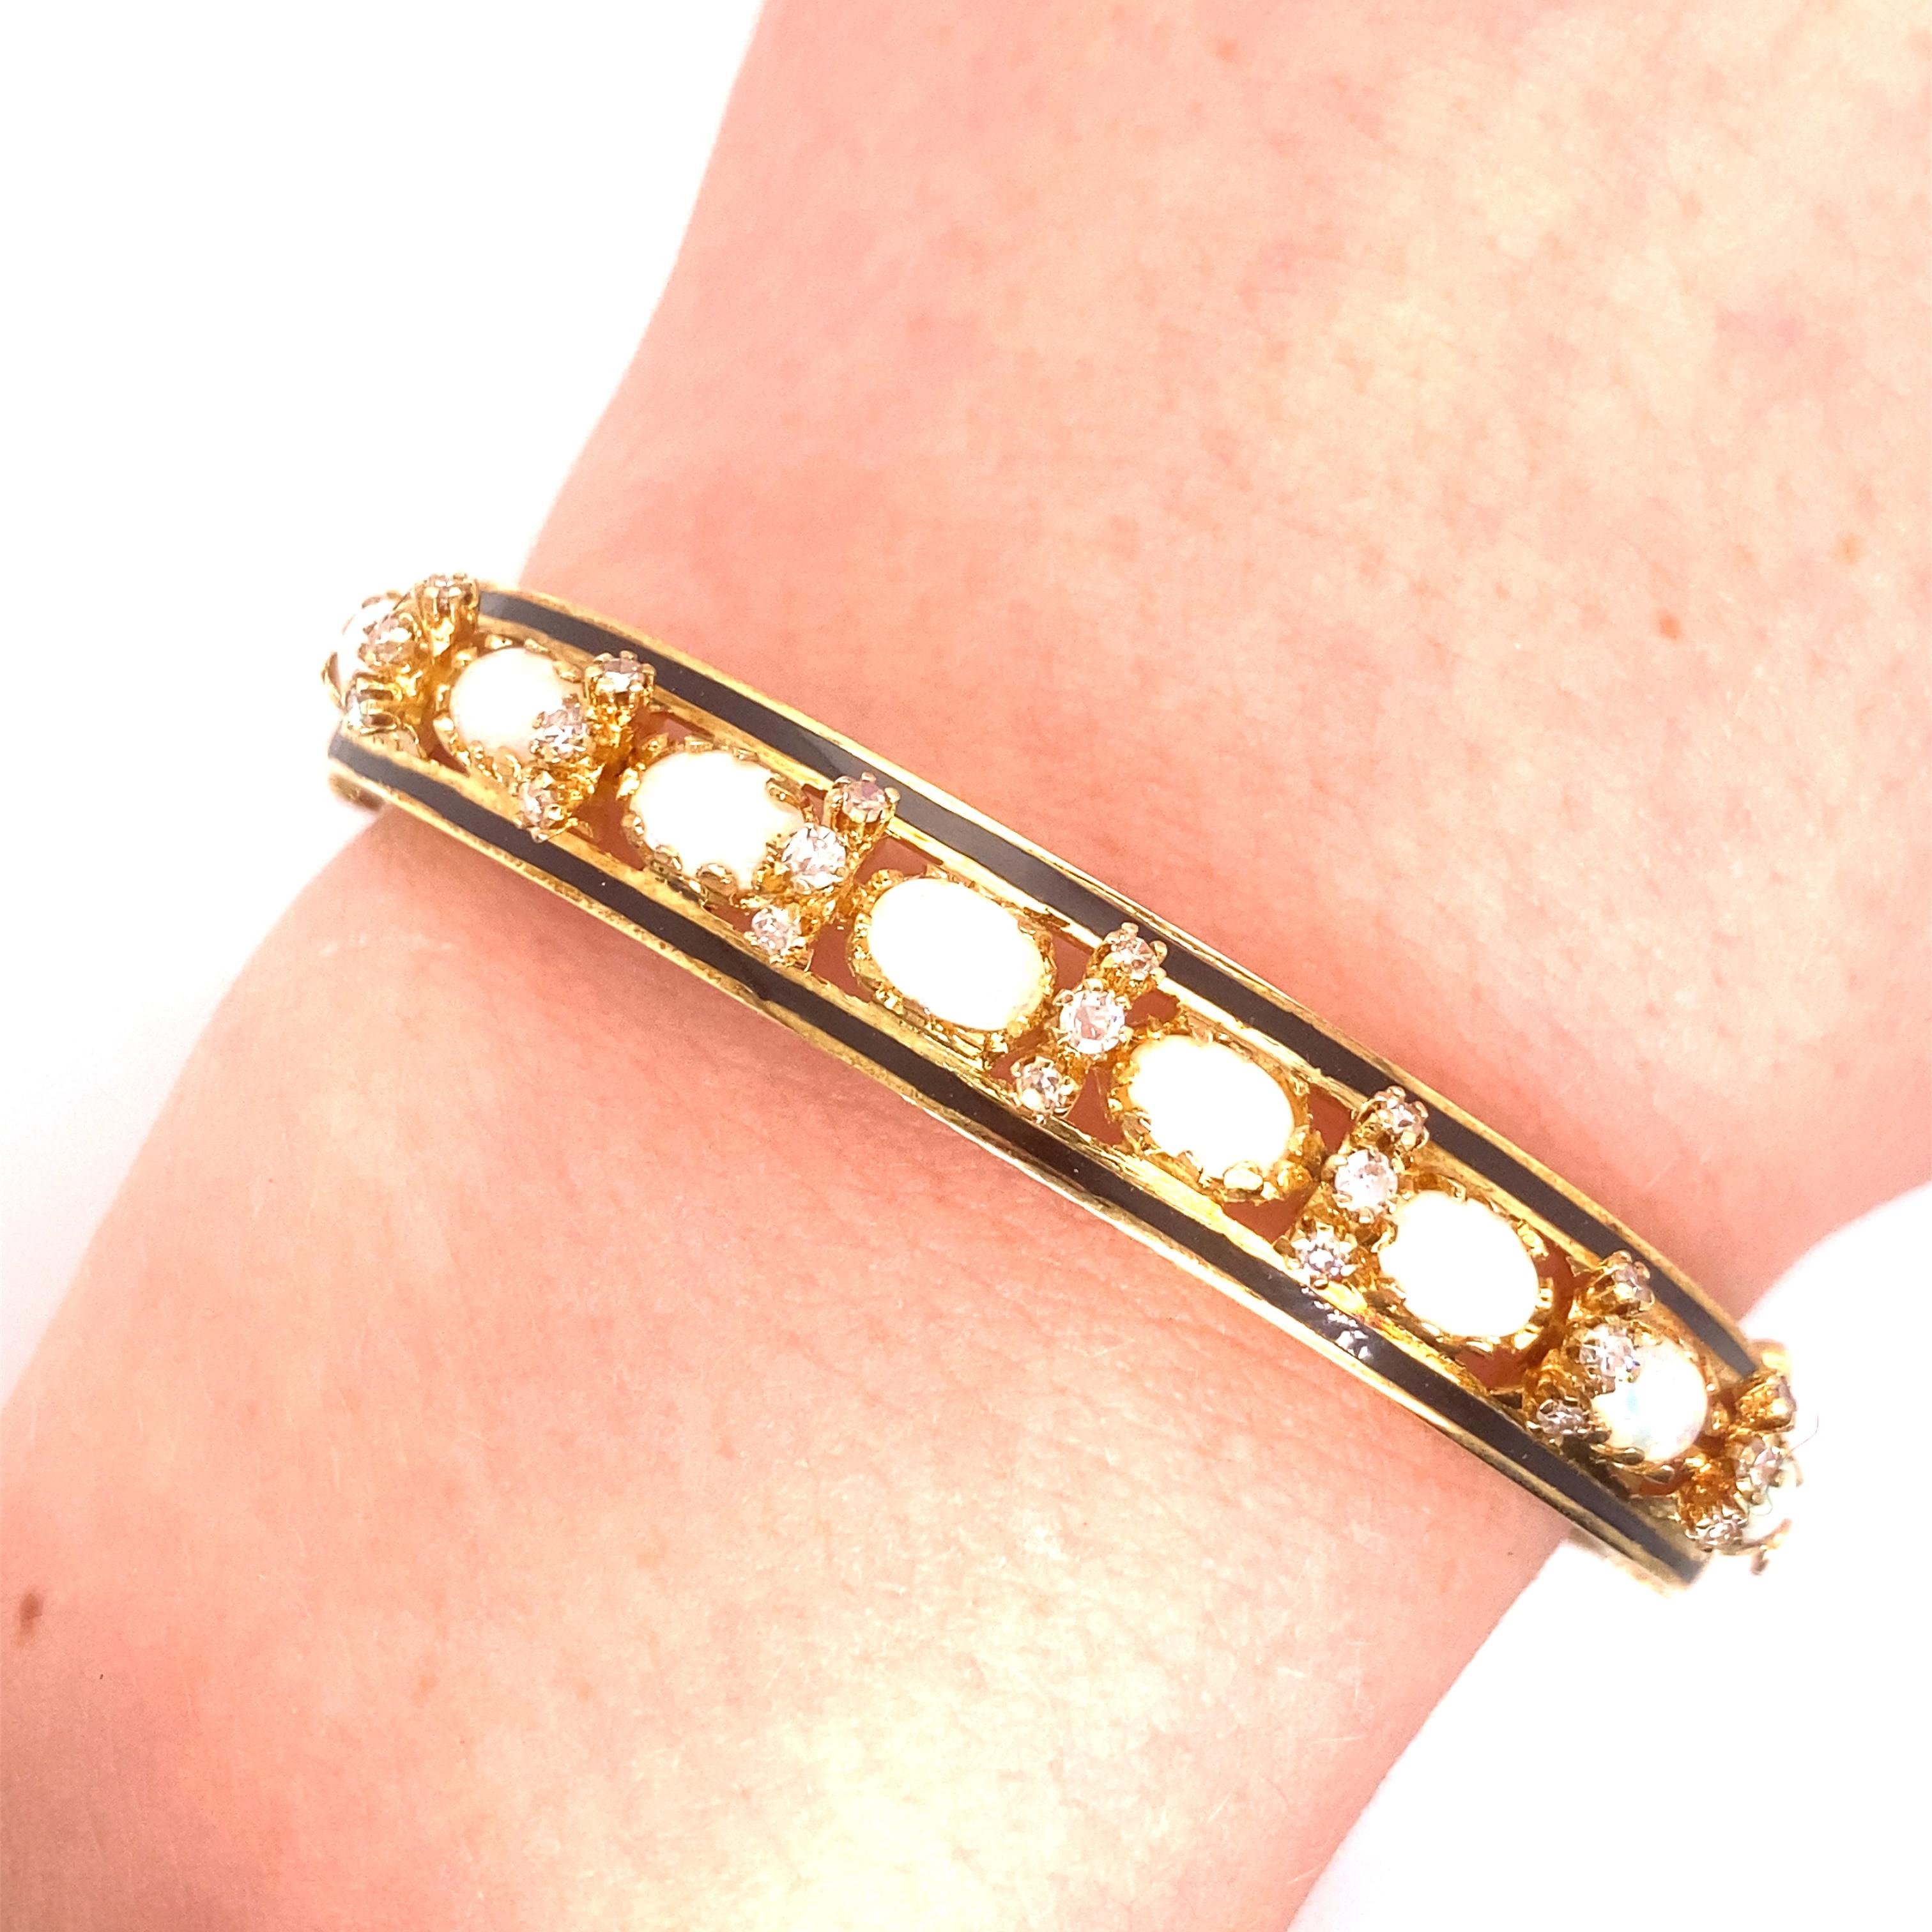 Vintage 14K Yellow Gold Victorian Reproduction Opal and Diamond Bangle Bracelet - The bangle contains 8 oval opals approximately 6 x 4mm with red and green play of color. There are 21 single cut diamonds accented in between the opals that weigh